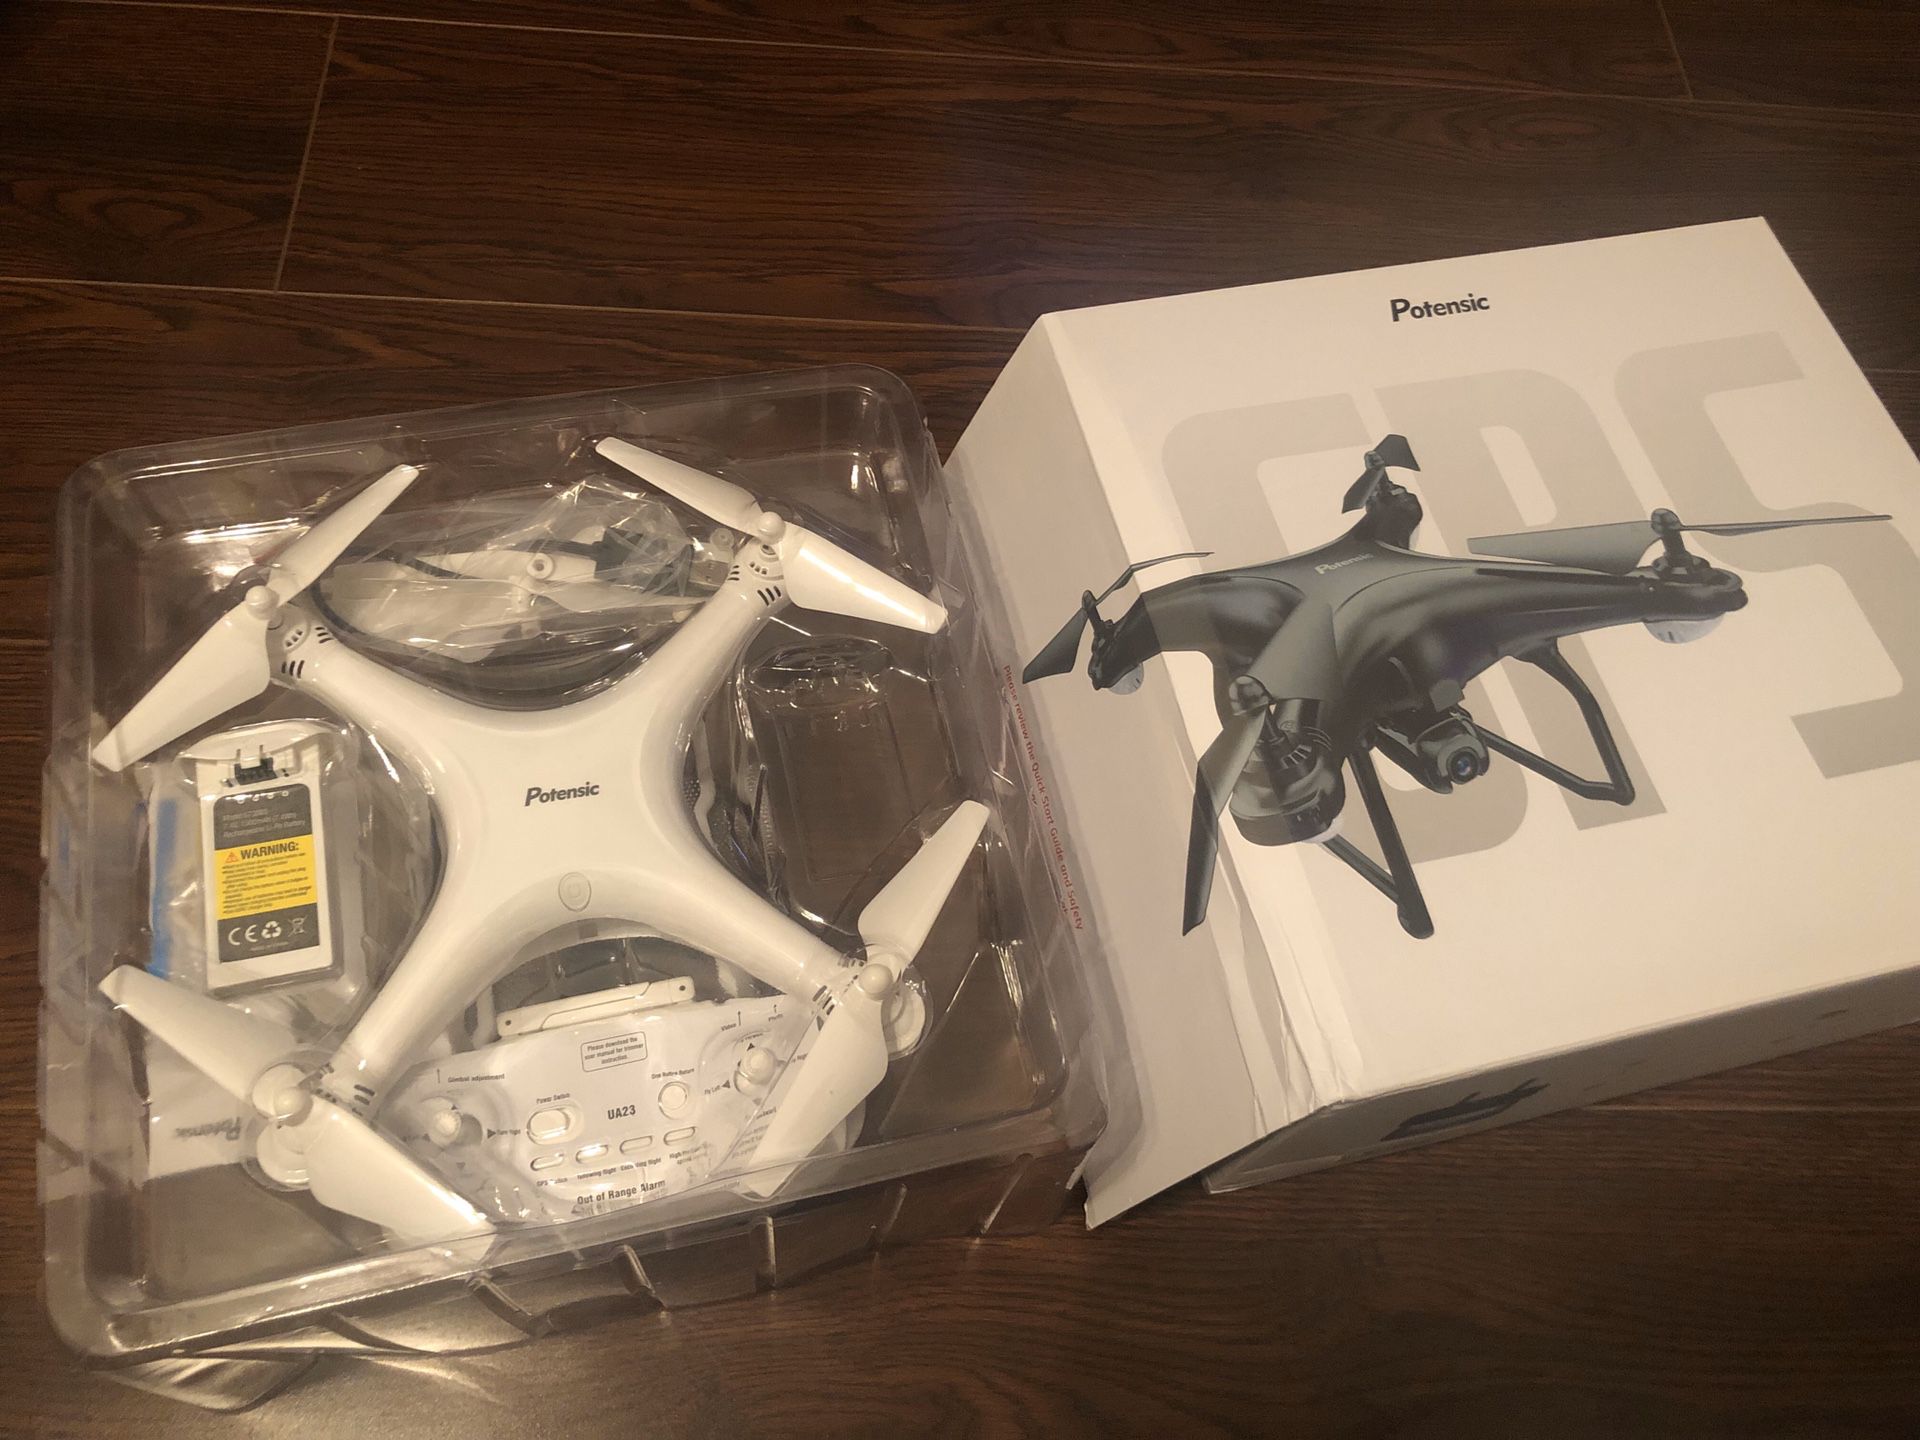 Brand-new!!! Potensic D58, Drone with Camera 1080P, GPS Quadcopter 120° Wide Angle 5G WiFi FPV, Potensic D58, Drone with Camera 1080P, GPS Quadcopter